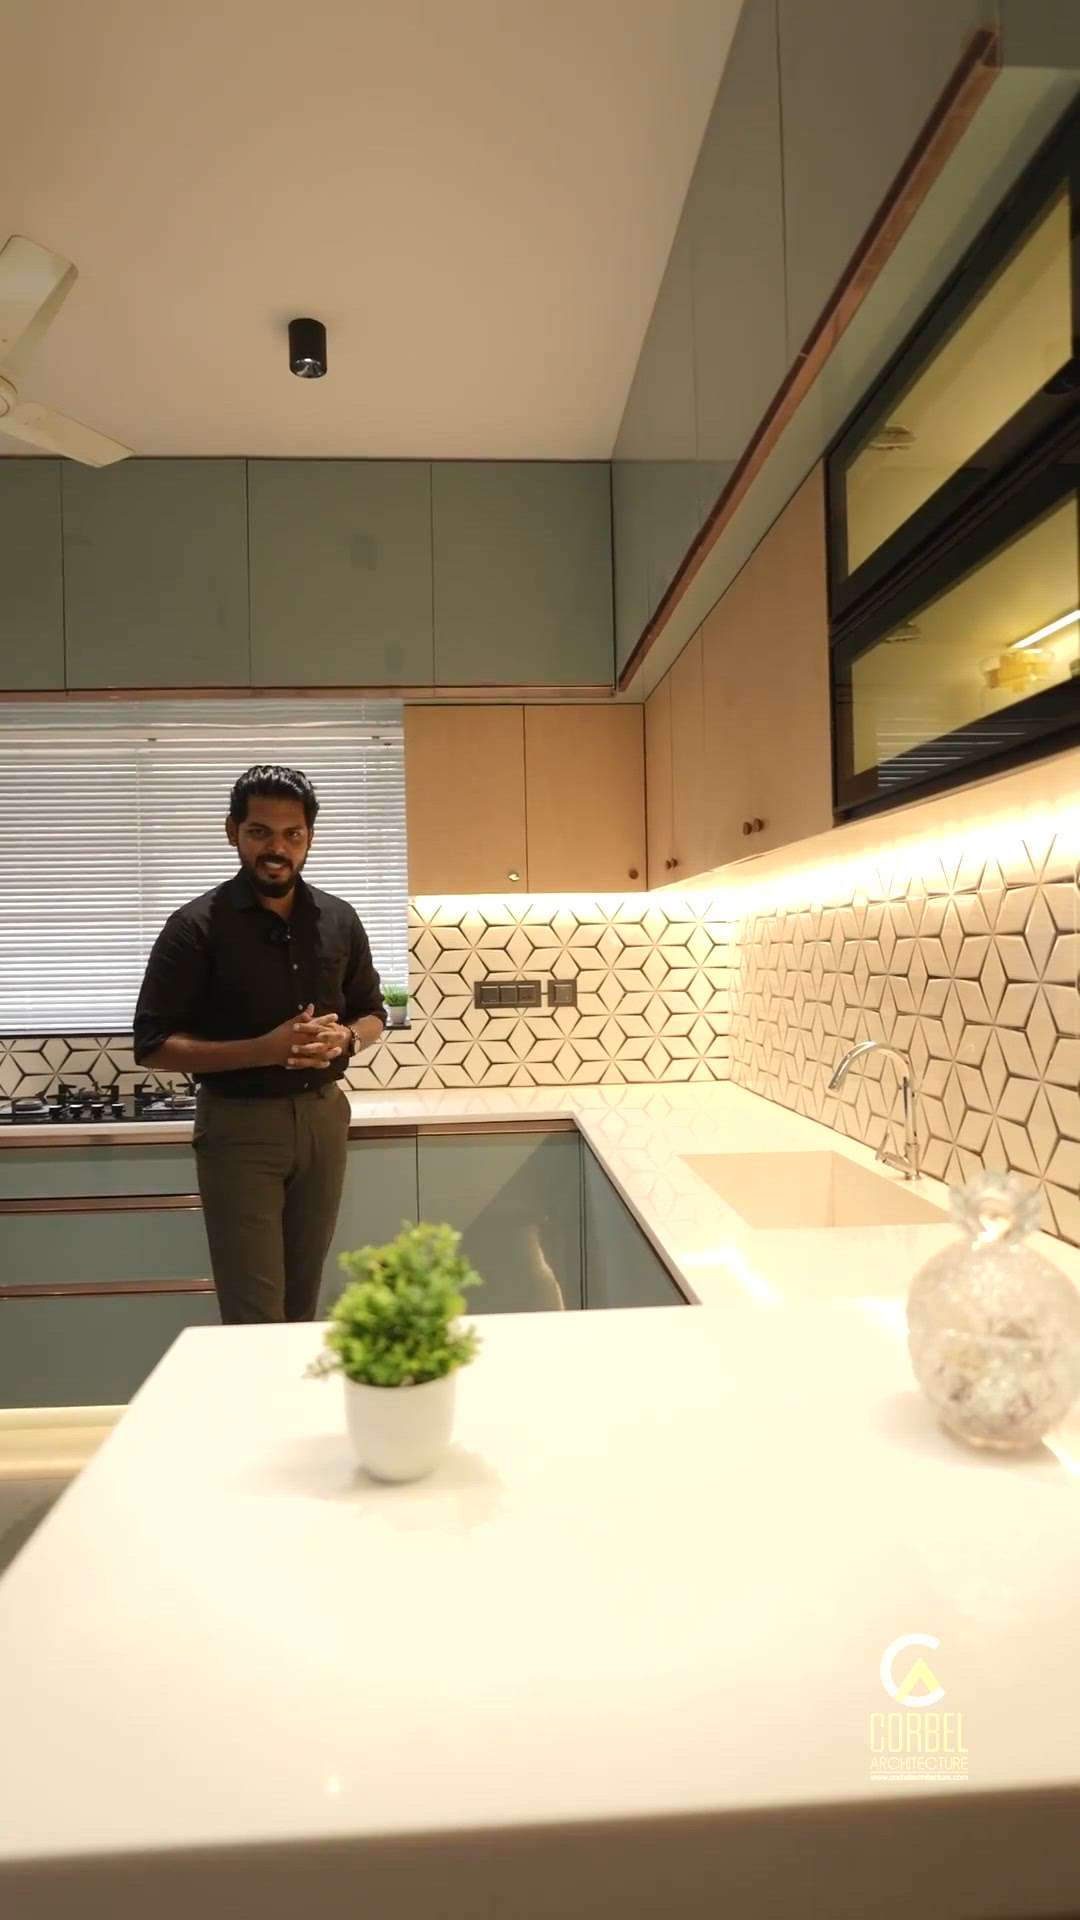 corbel_architecture About the Kitchen area 
#kitchen area video
1935 sqft|3bhk|double storey|Kozhikode 
Total Area: 1935 sqft
Bed Room: 3 bhk
Elevation Style: contemporary
Completed Year: 2023 
Client name:Adarsh
Location: odumbra,Kozhikode

#Kitchen #modernkitchen #Budgethomes #contemporaryhomes #contemporary #modernelevation #contemporarydesign #3ddesign #corbelarchitecture #corbel #kolokerala #kolo